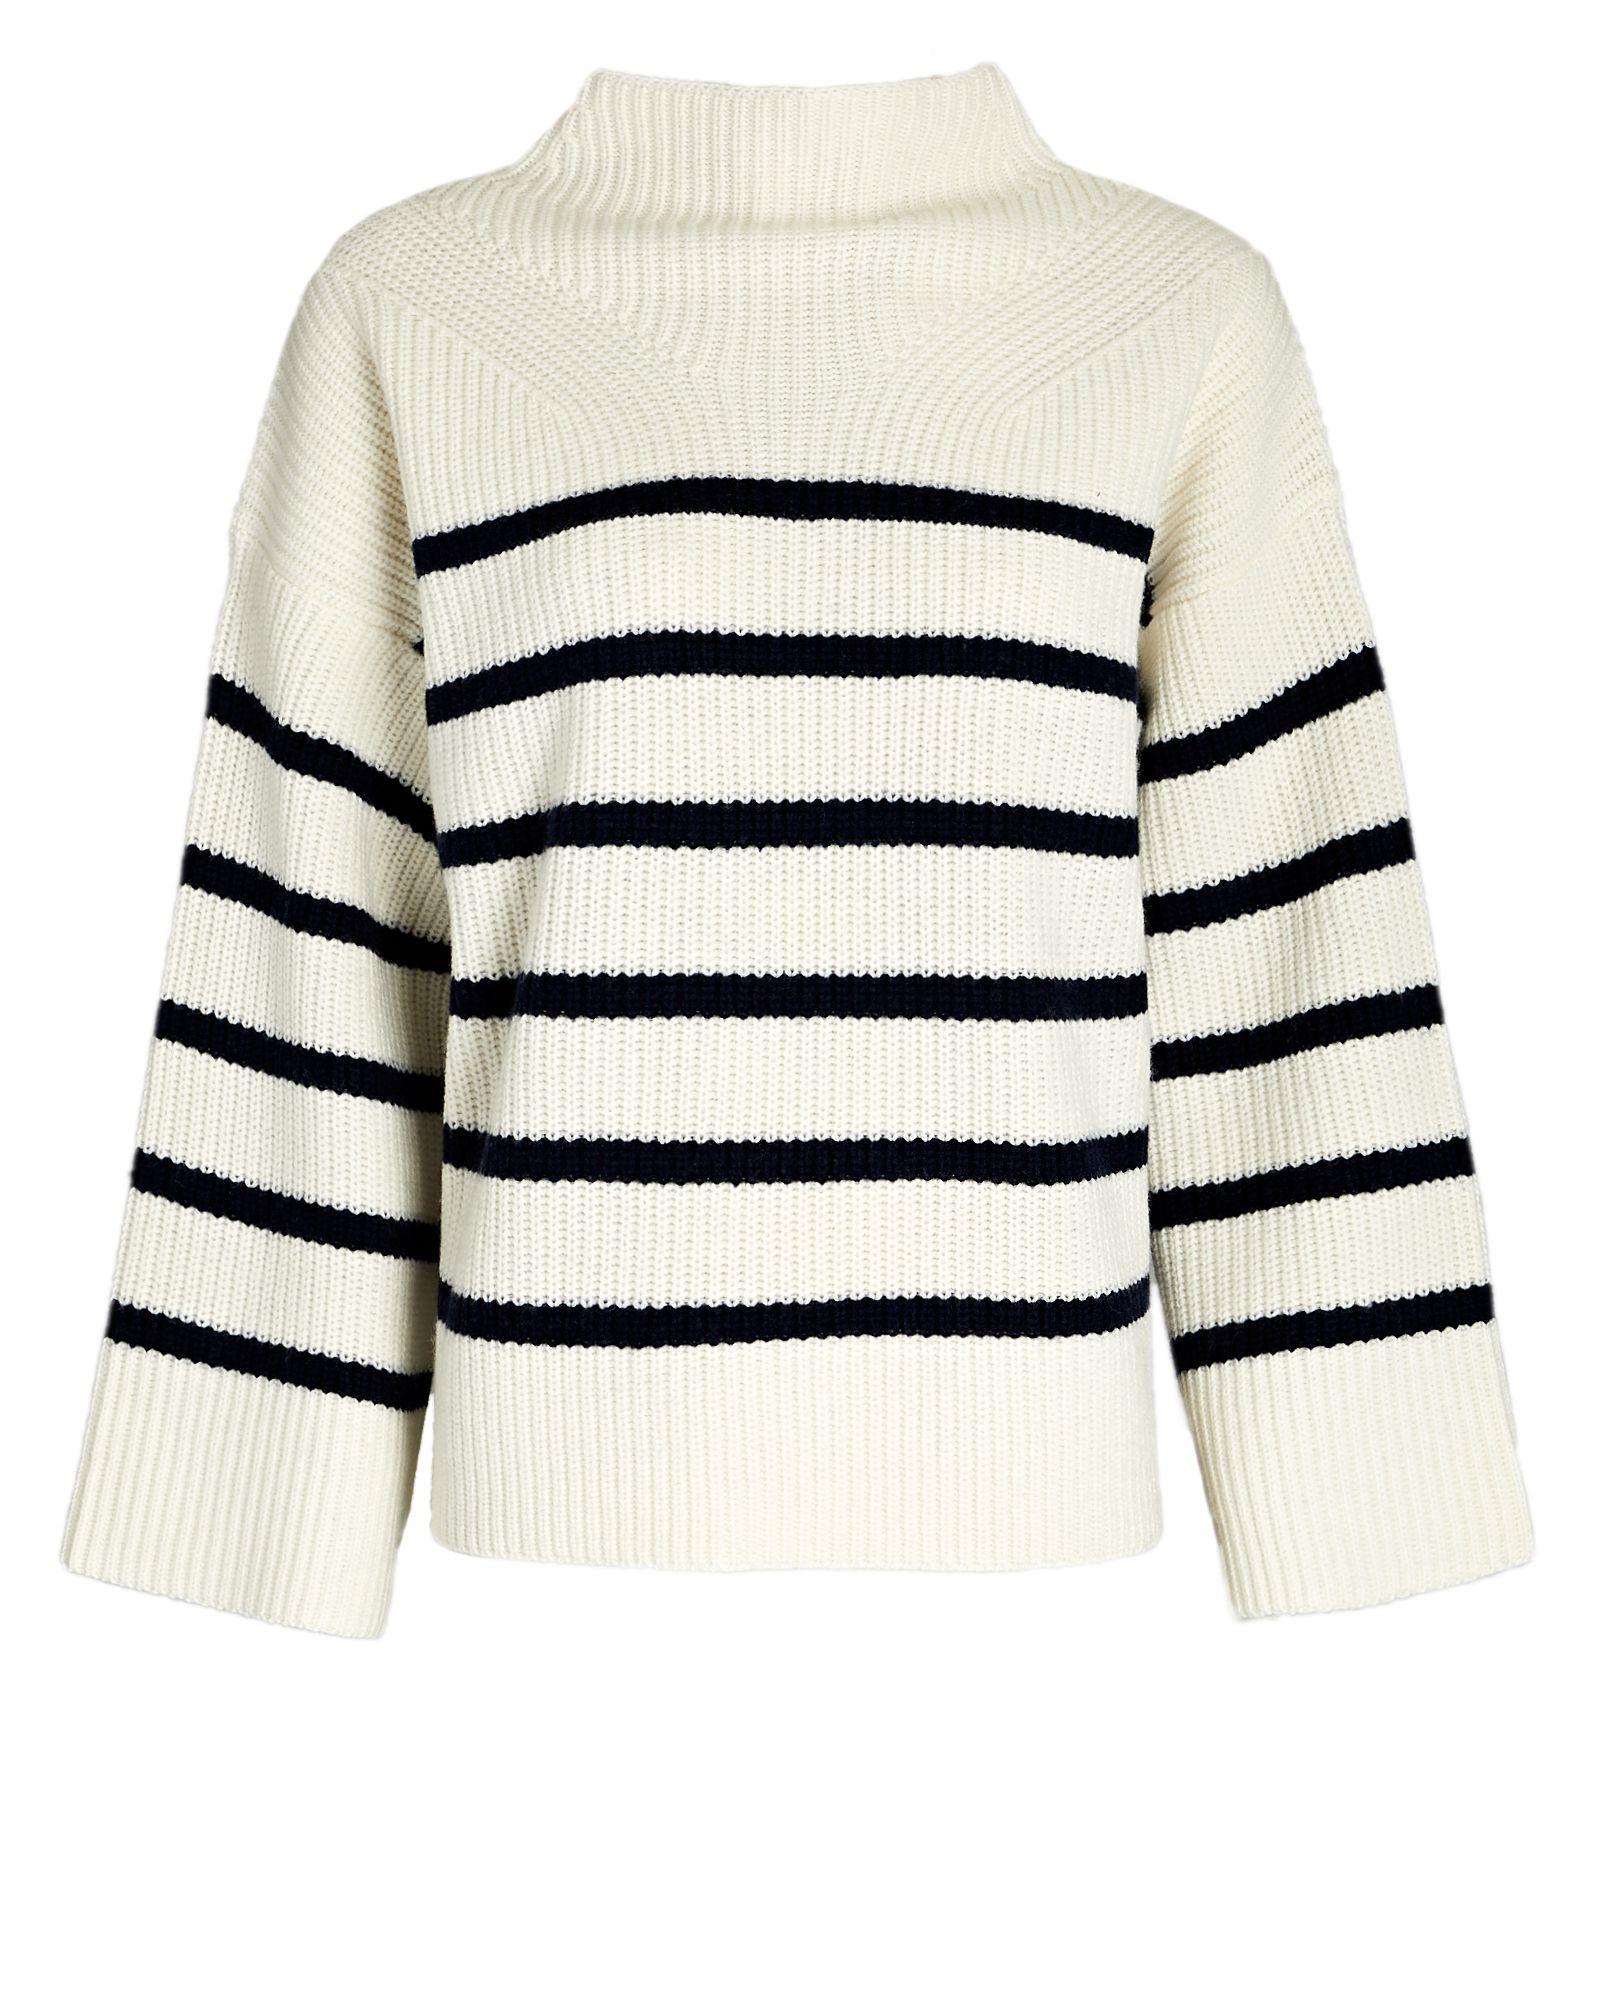 A.L.C. Louise Striped Wool Turtleneck Sweater in White | Lyst